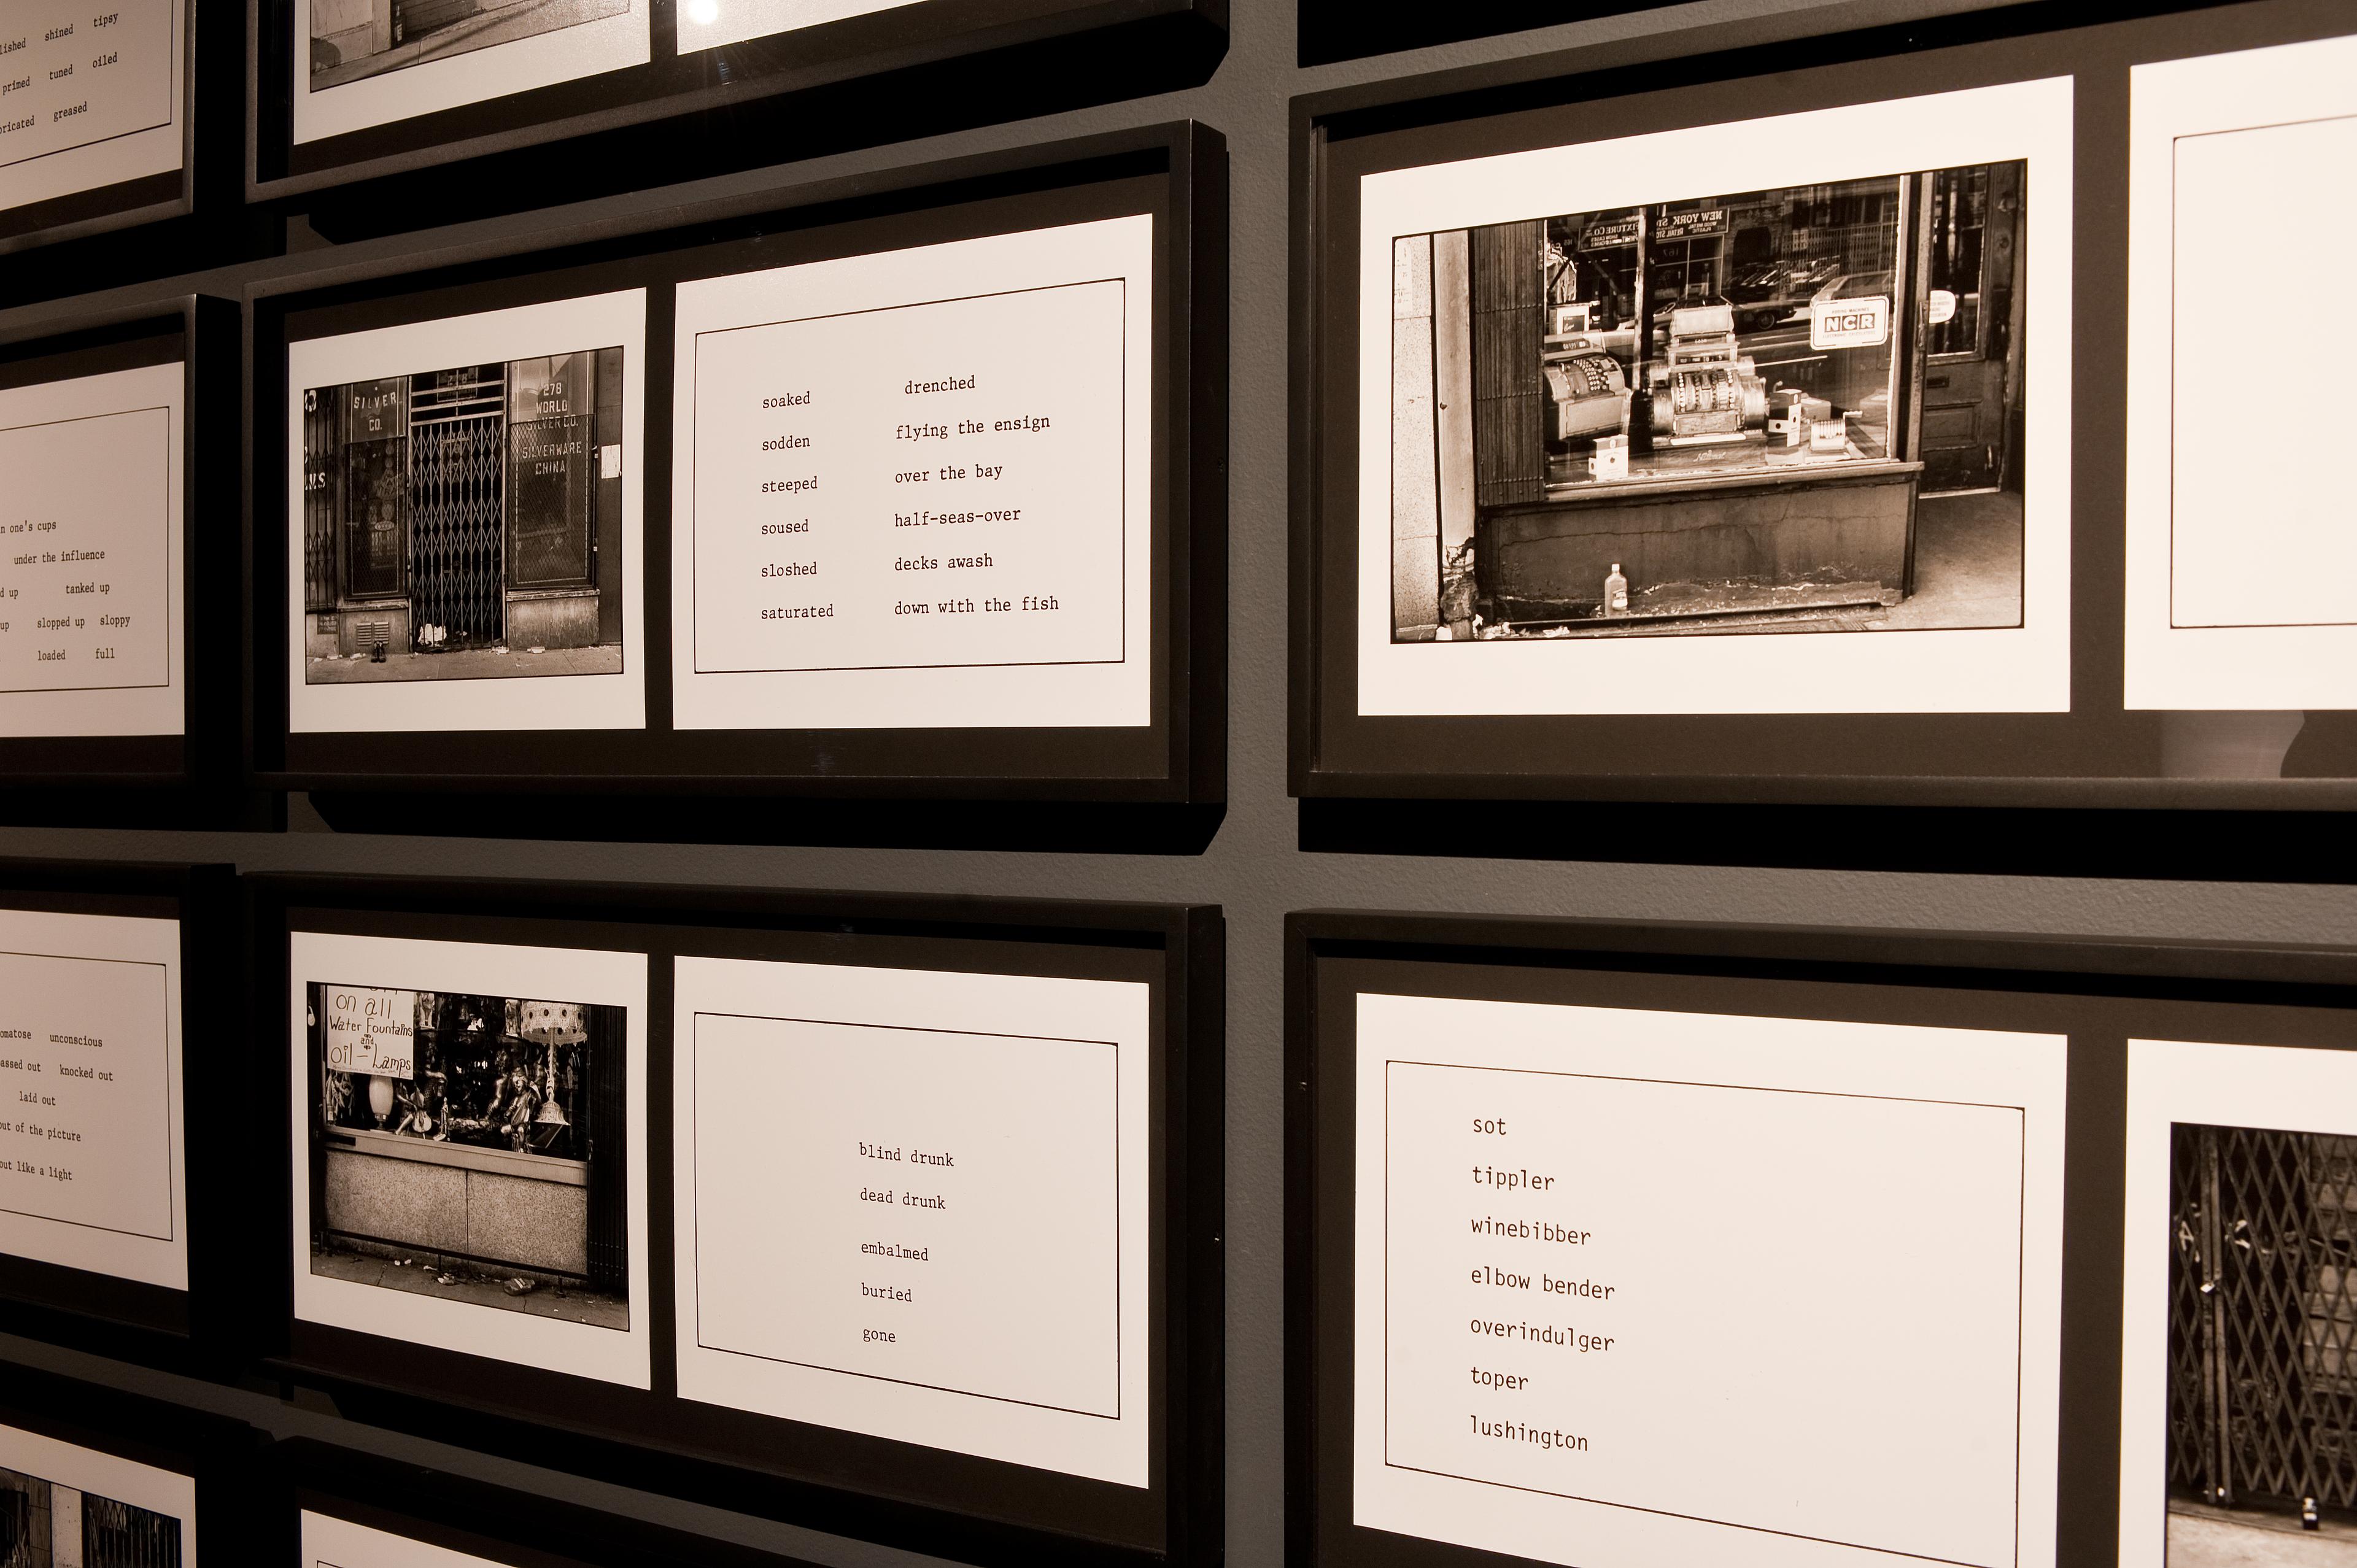 Martha Rosler, The Bowery in Two Inadequate Descriptive Systems, 1974-75, Series of 45 gelatin silver prints of text and images on 24 backing boards. Installation view, Martha Rosler: The Bowery in Two Inadequate Descriptive Systems, Adam Art Gallery Te Pātaka Toi, Victoria University of Wellington. Photo: Robert Cross